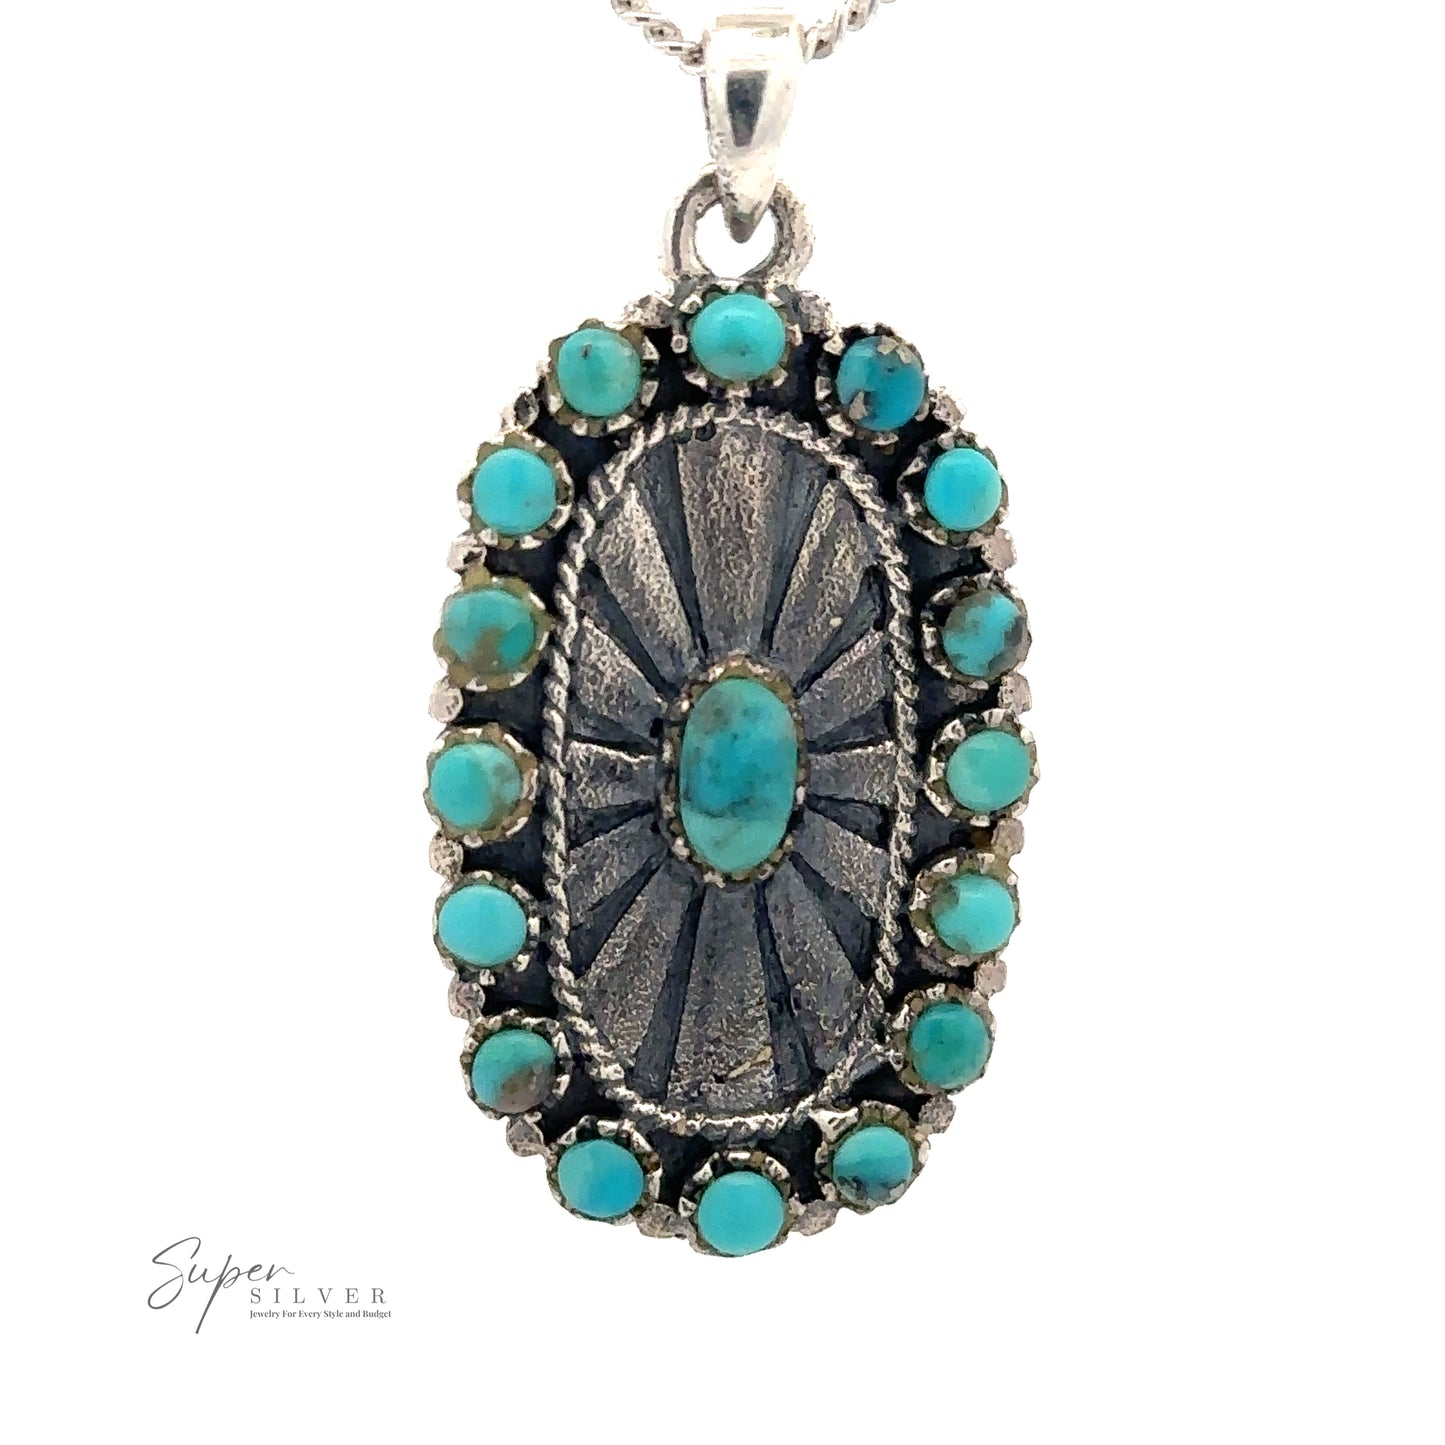 An oval turquoise and metal Native Inspired Turquoise Pendant with a sunburst pattern, surrounded by small turquoise stones, hangs from a silver chain. This Native-Inspired piece exudes Southwestern charm. The logo "Super Silver" is visible in the bottom left corner.